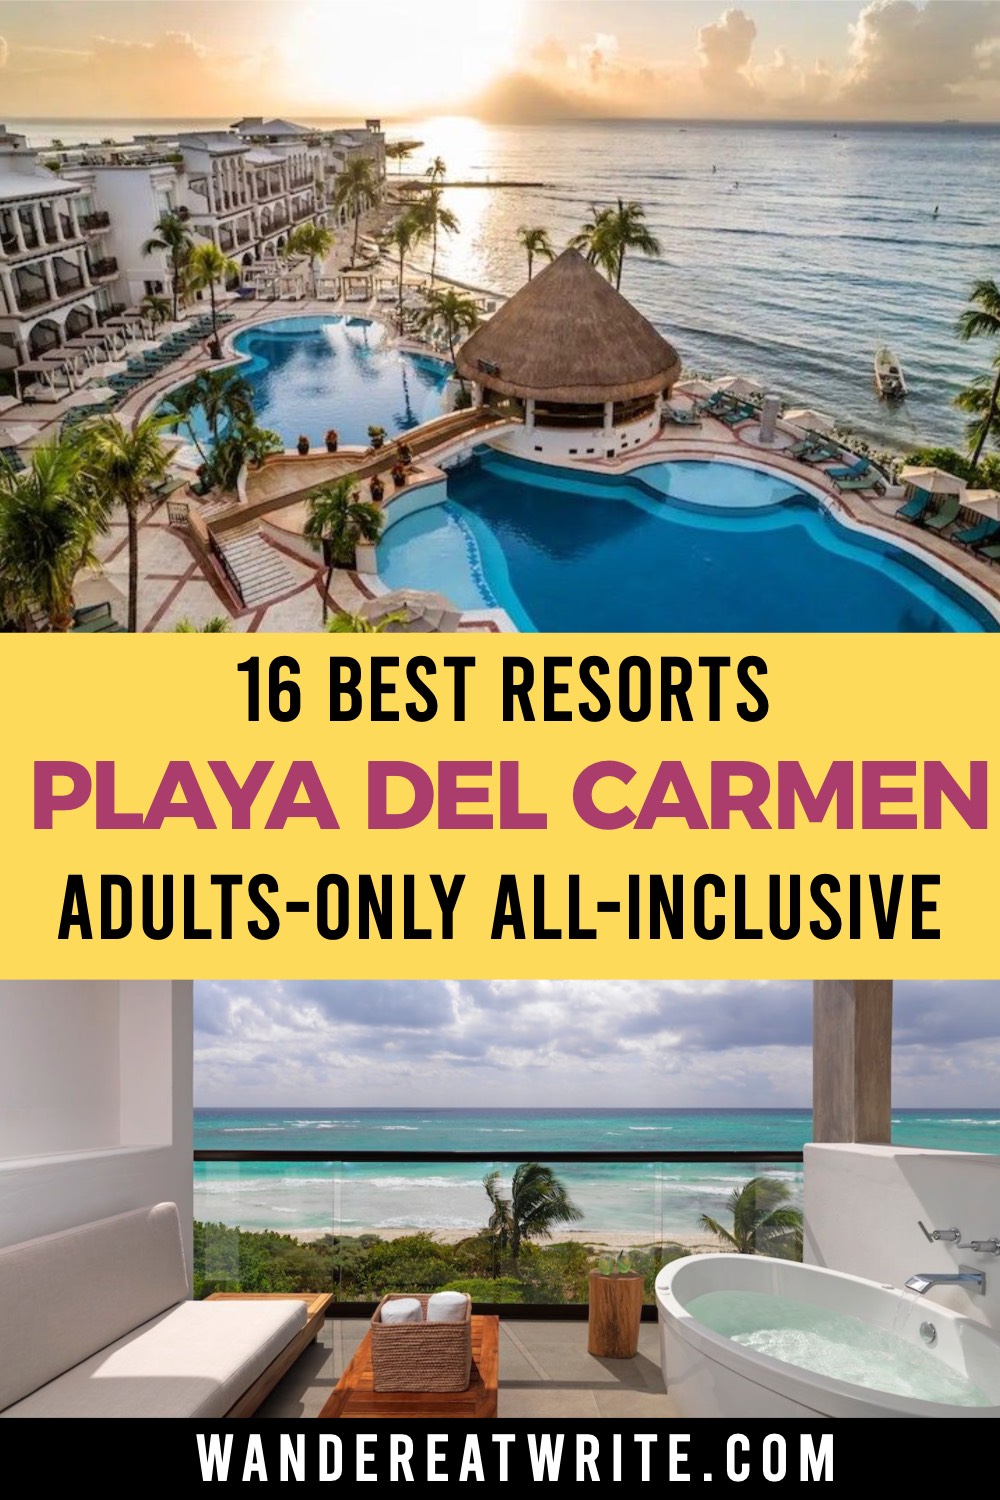 Pinterest pin. Text: 16 Best Resorts Playa del Carmen Adults Only All Inclusive. Top photo: aerial shot of a resort with a swimming pool, palm trees, and the beach in the background during sunset. Bottom photo: a private terrace with a beachfront view, outdoor lounge bench, table, two towels in a basket, and a large soaking tub